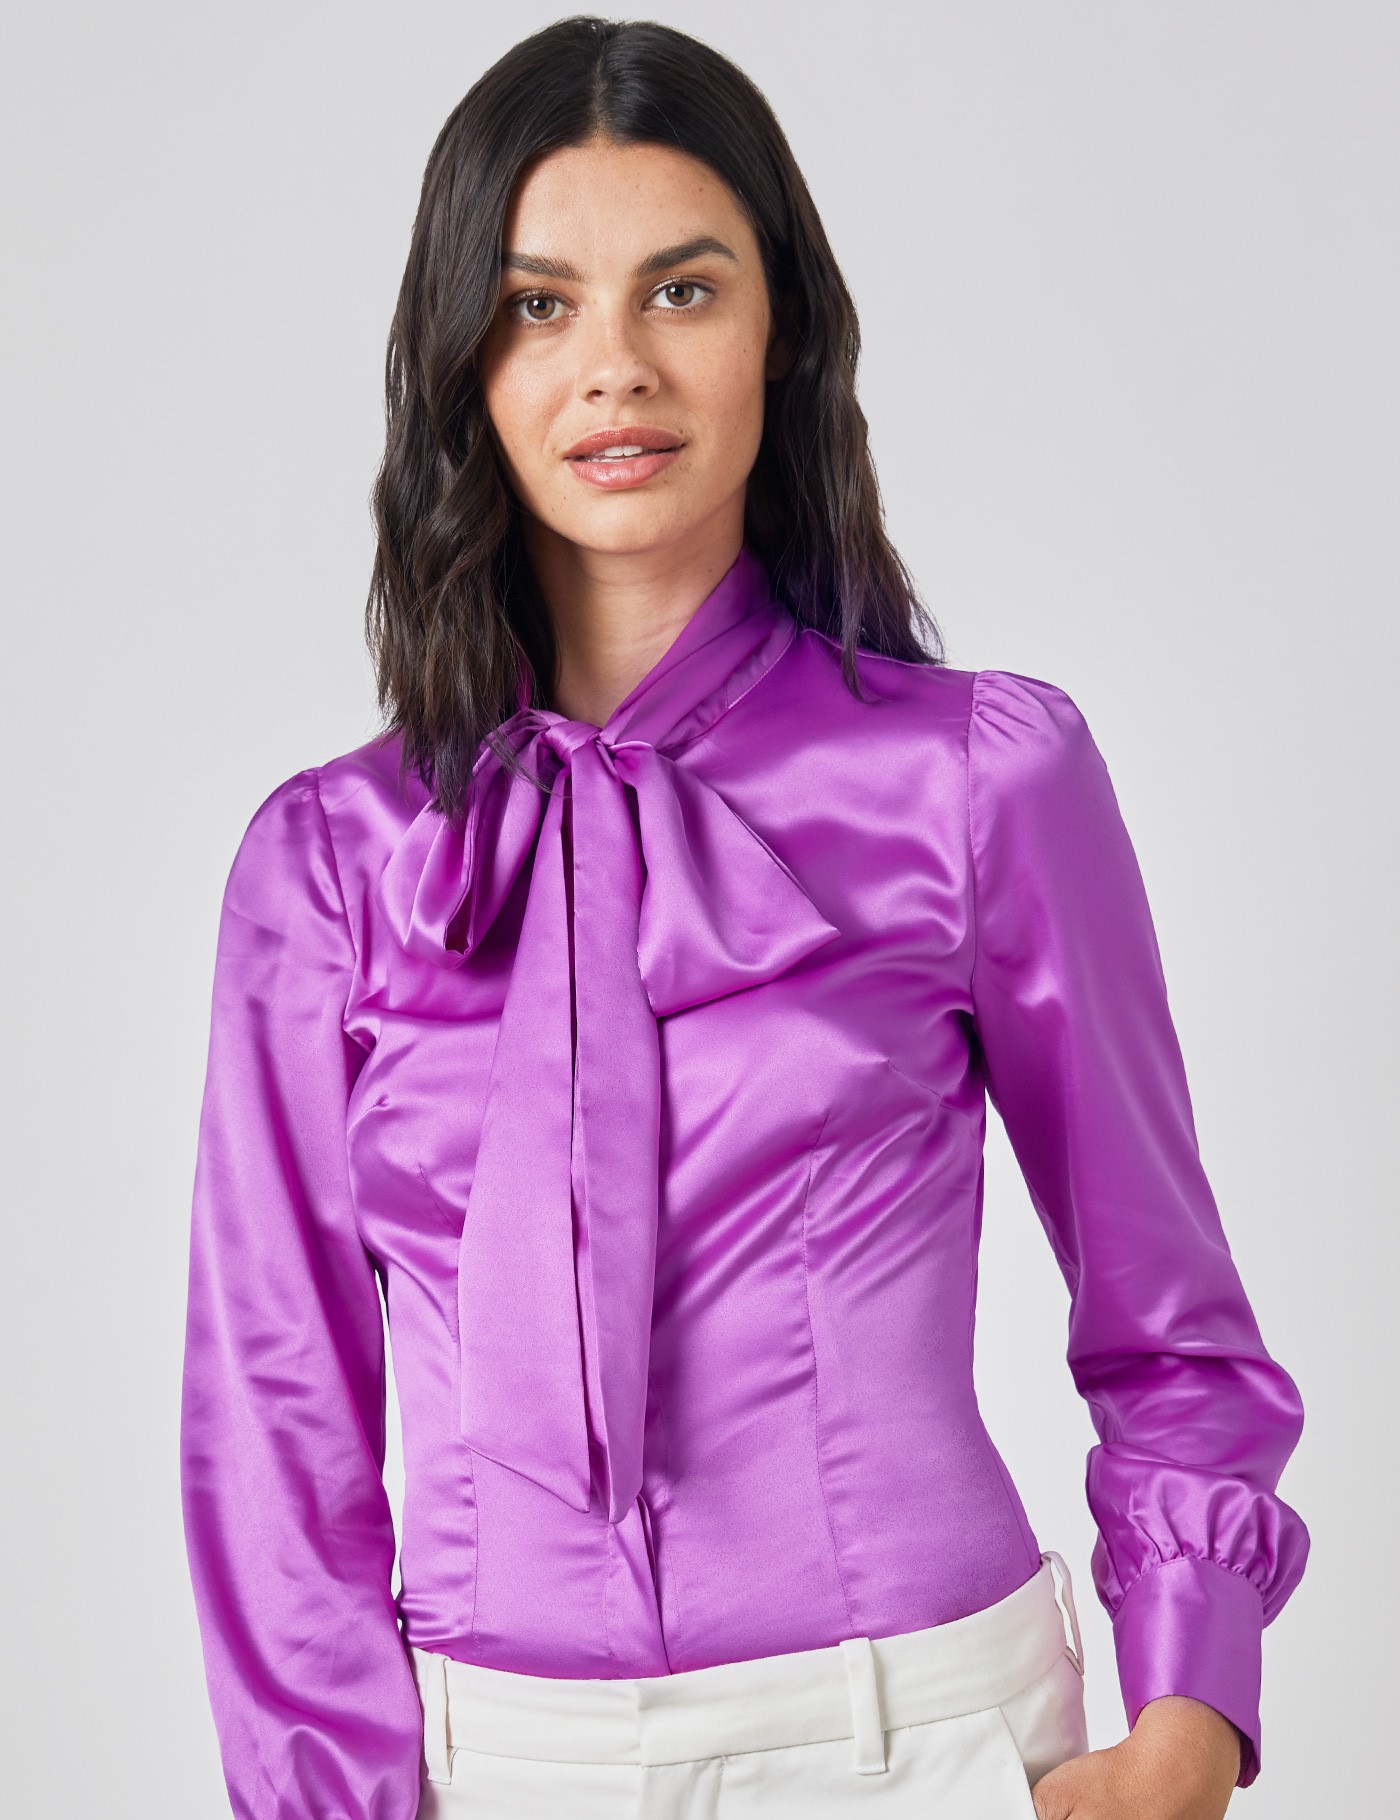 Plain Satin Women S Fitted Blouse With Single Cuff And Pussy Bow In Bright Purple Hawes And Curtis